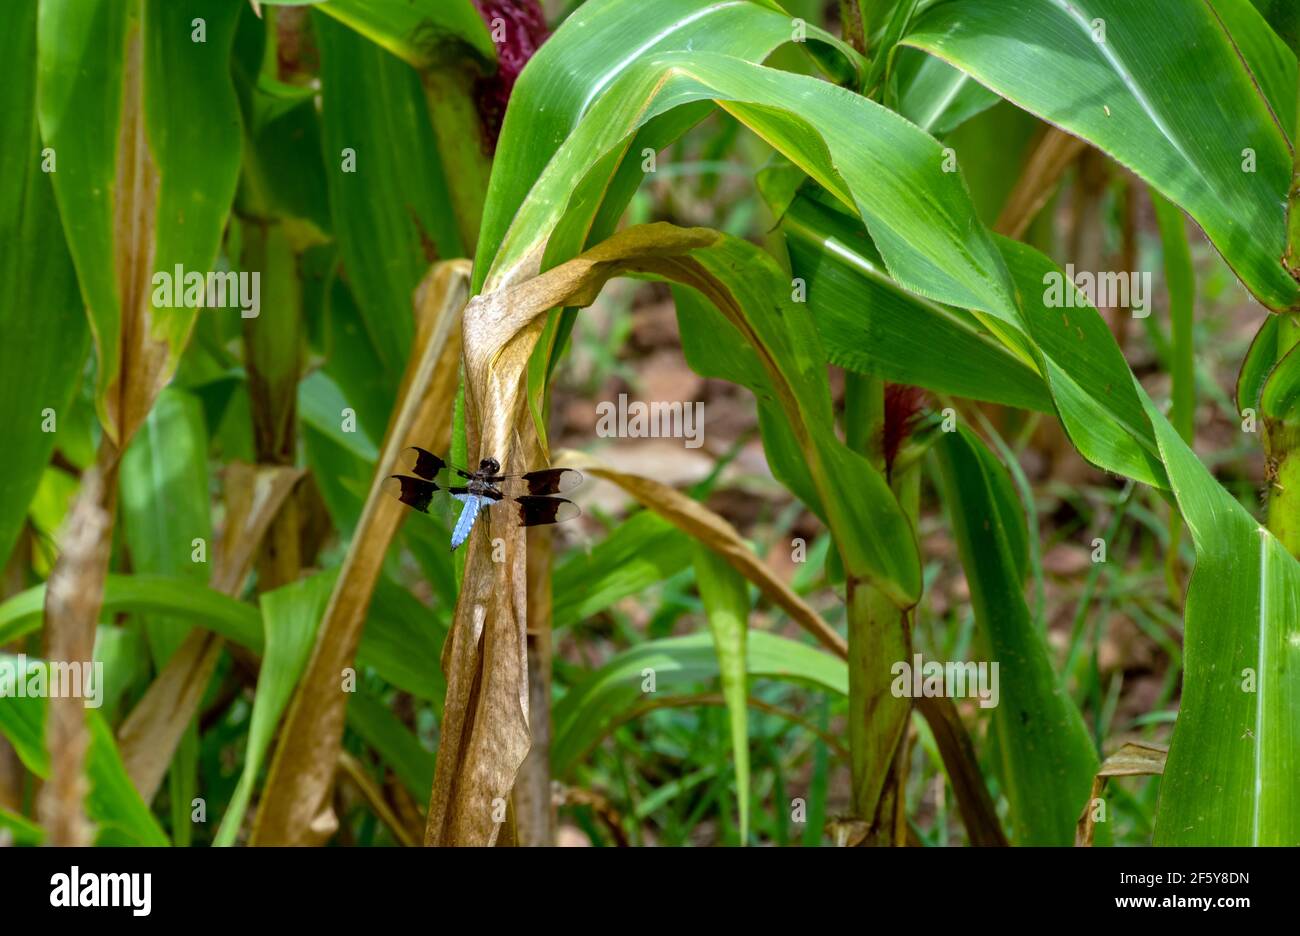 A common whitetail dragonfly found corn stalks in the Missouri garden to be a nice resting place. Bokeh effect. Stock Photo